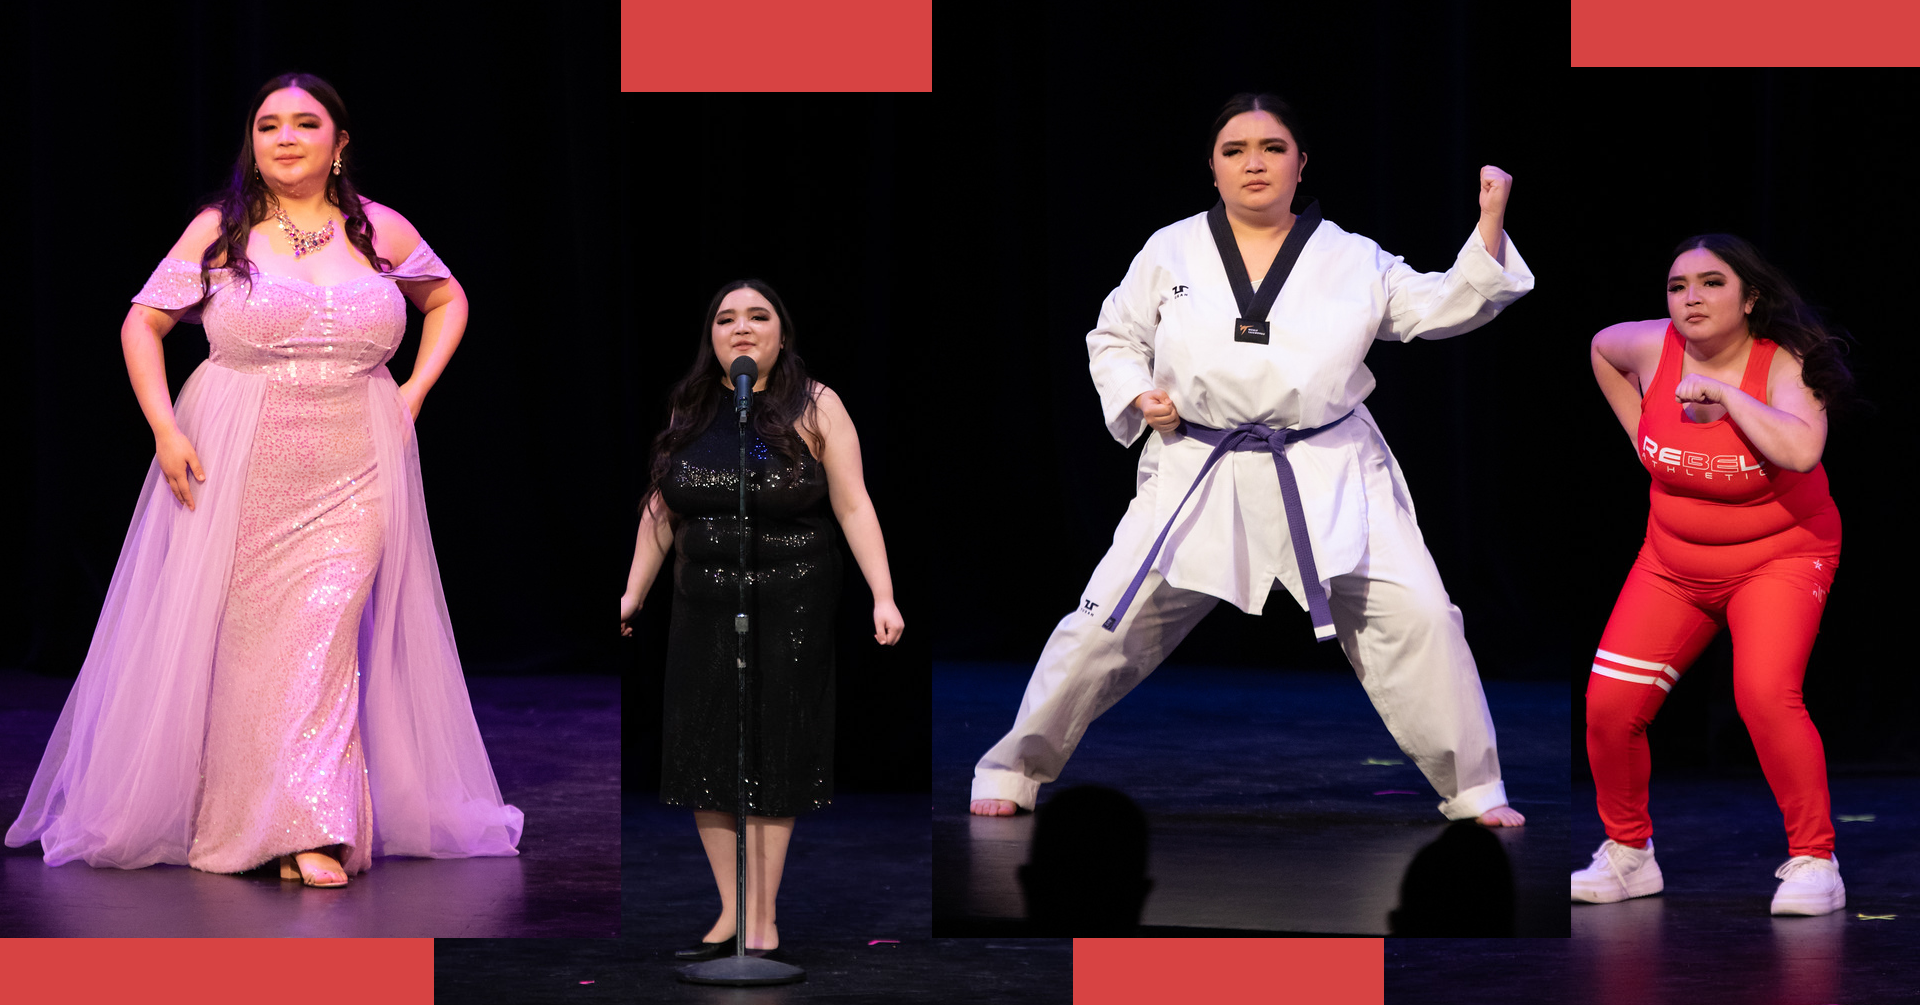 SRJC student Ellie Audette competing for Miss Sonoma County in various outfits: pink evening dress, black dress, martial arts attire, sports outfit. 